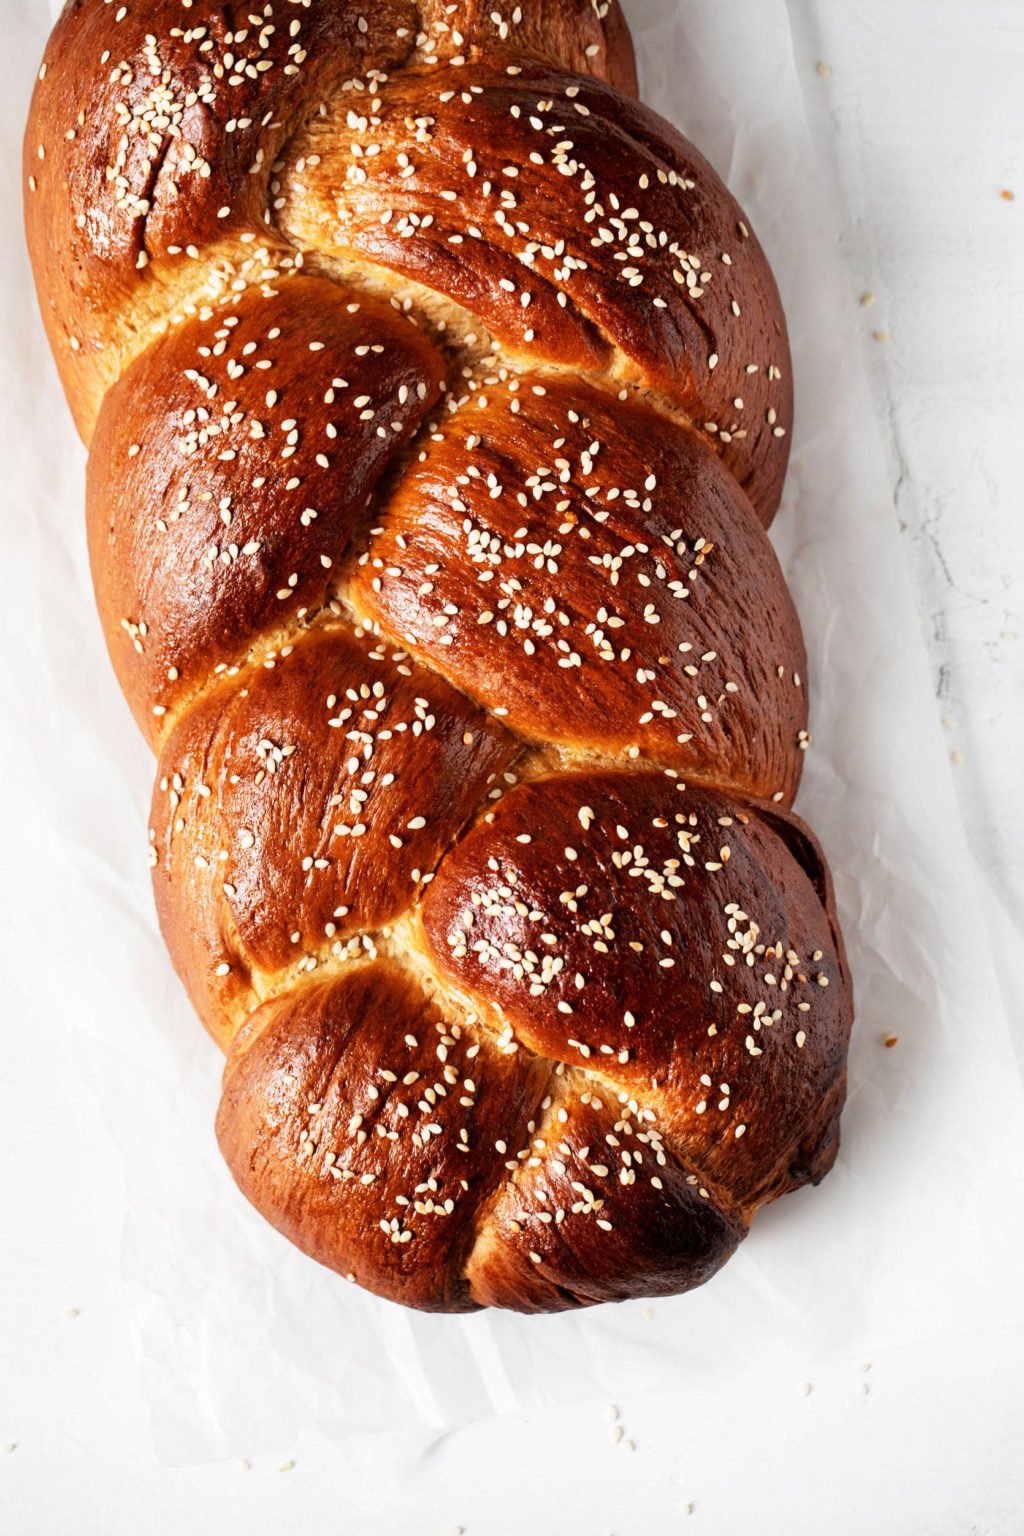 A braided plait of a three strand loaf of bread, garnished with sesame seeds and resting on white parchment.